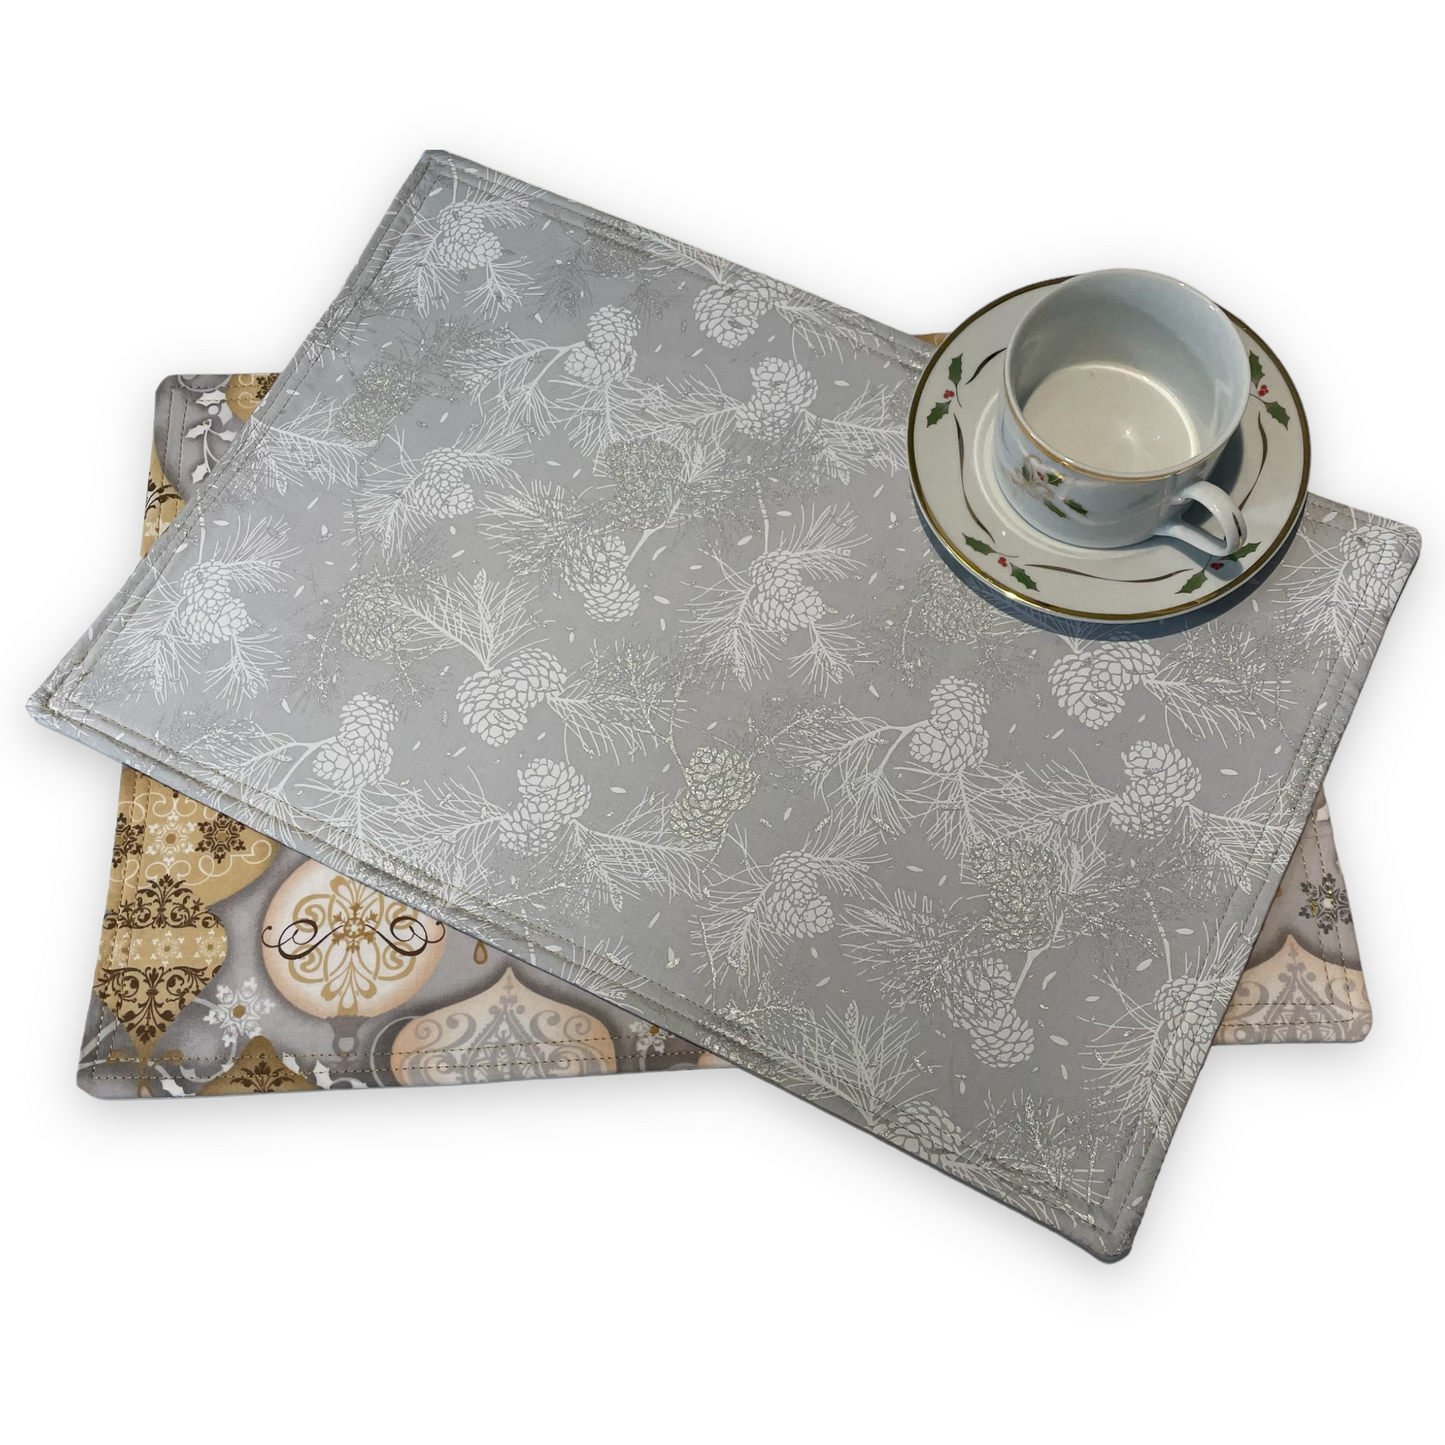 Reversible Christmas Placemats Featuring Gold and Silver Ornaments on one side and Silver Pinecones on the opposite side. Luxurious handmade Christmas Table Placemats. Part of a collection by Home Stitchery Decor. Check out all the mix and match items online.